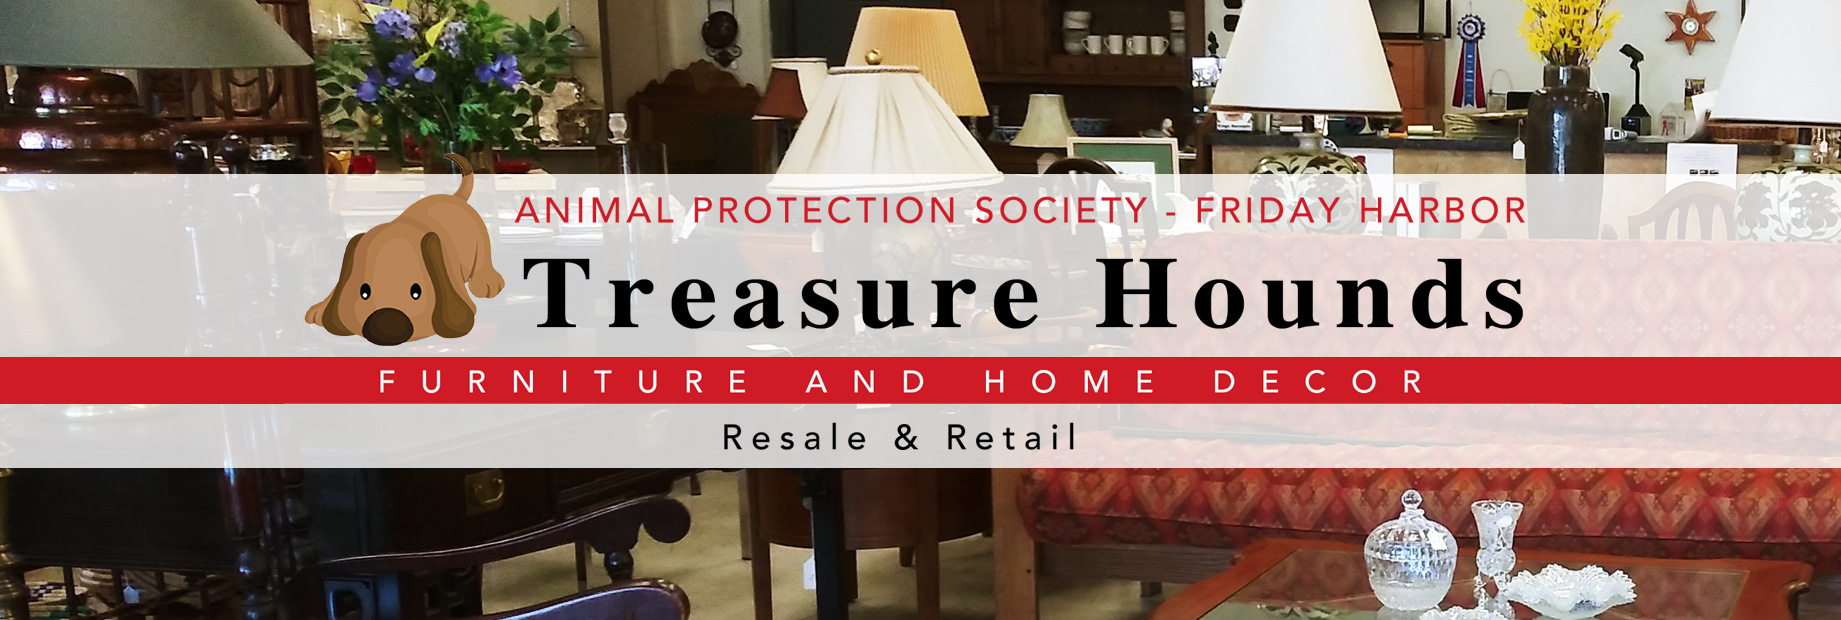 Treasure Hounds Page Banner